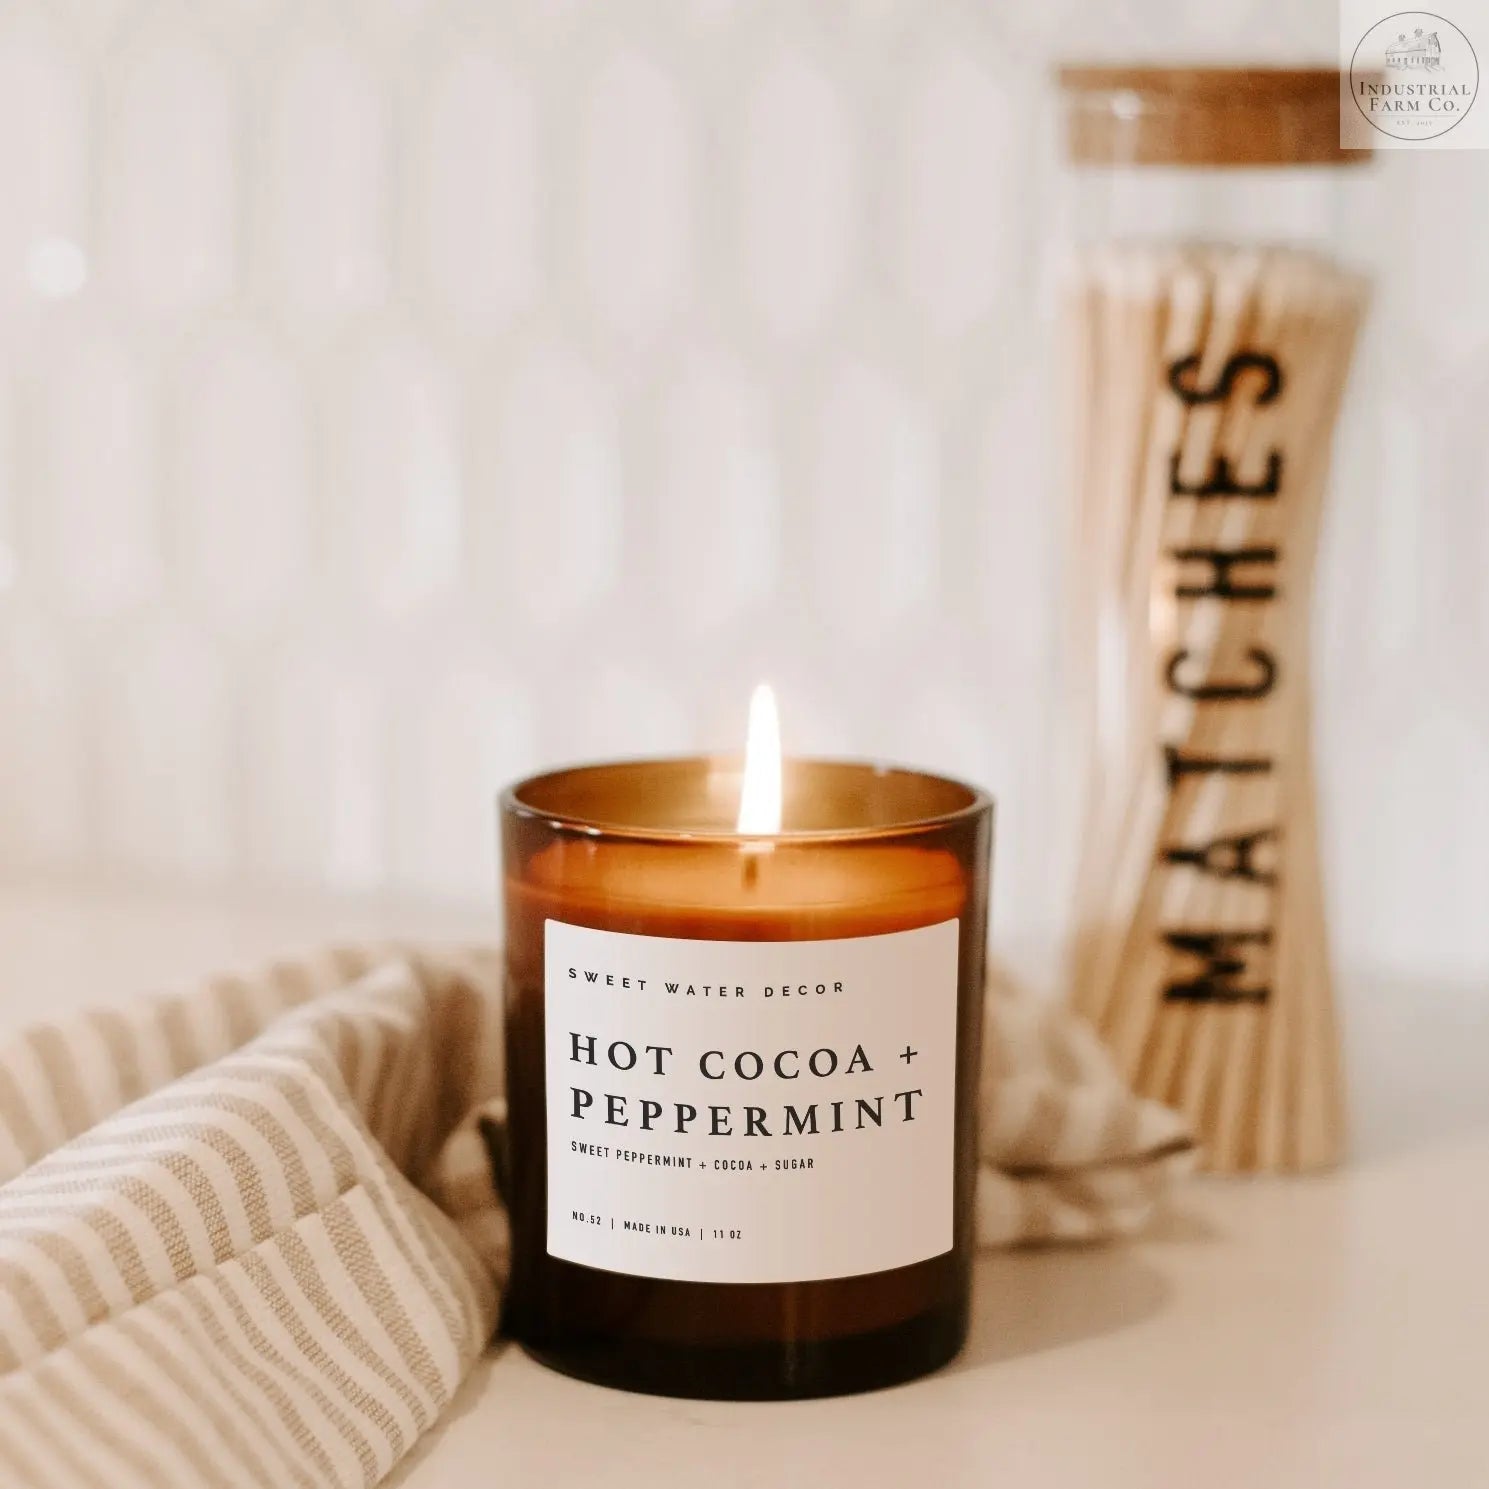 Hot Cocoa and Peppermint Soy Wax Candle | Industrial Farm Co